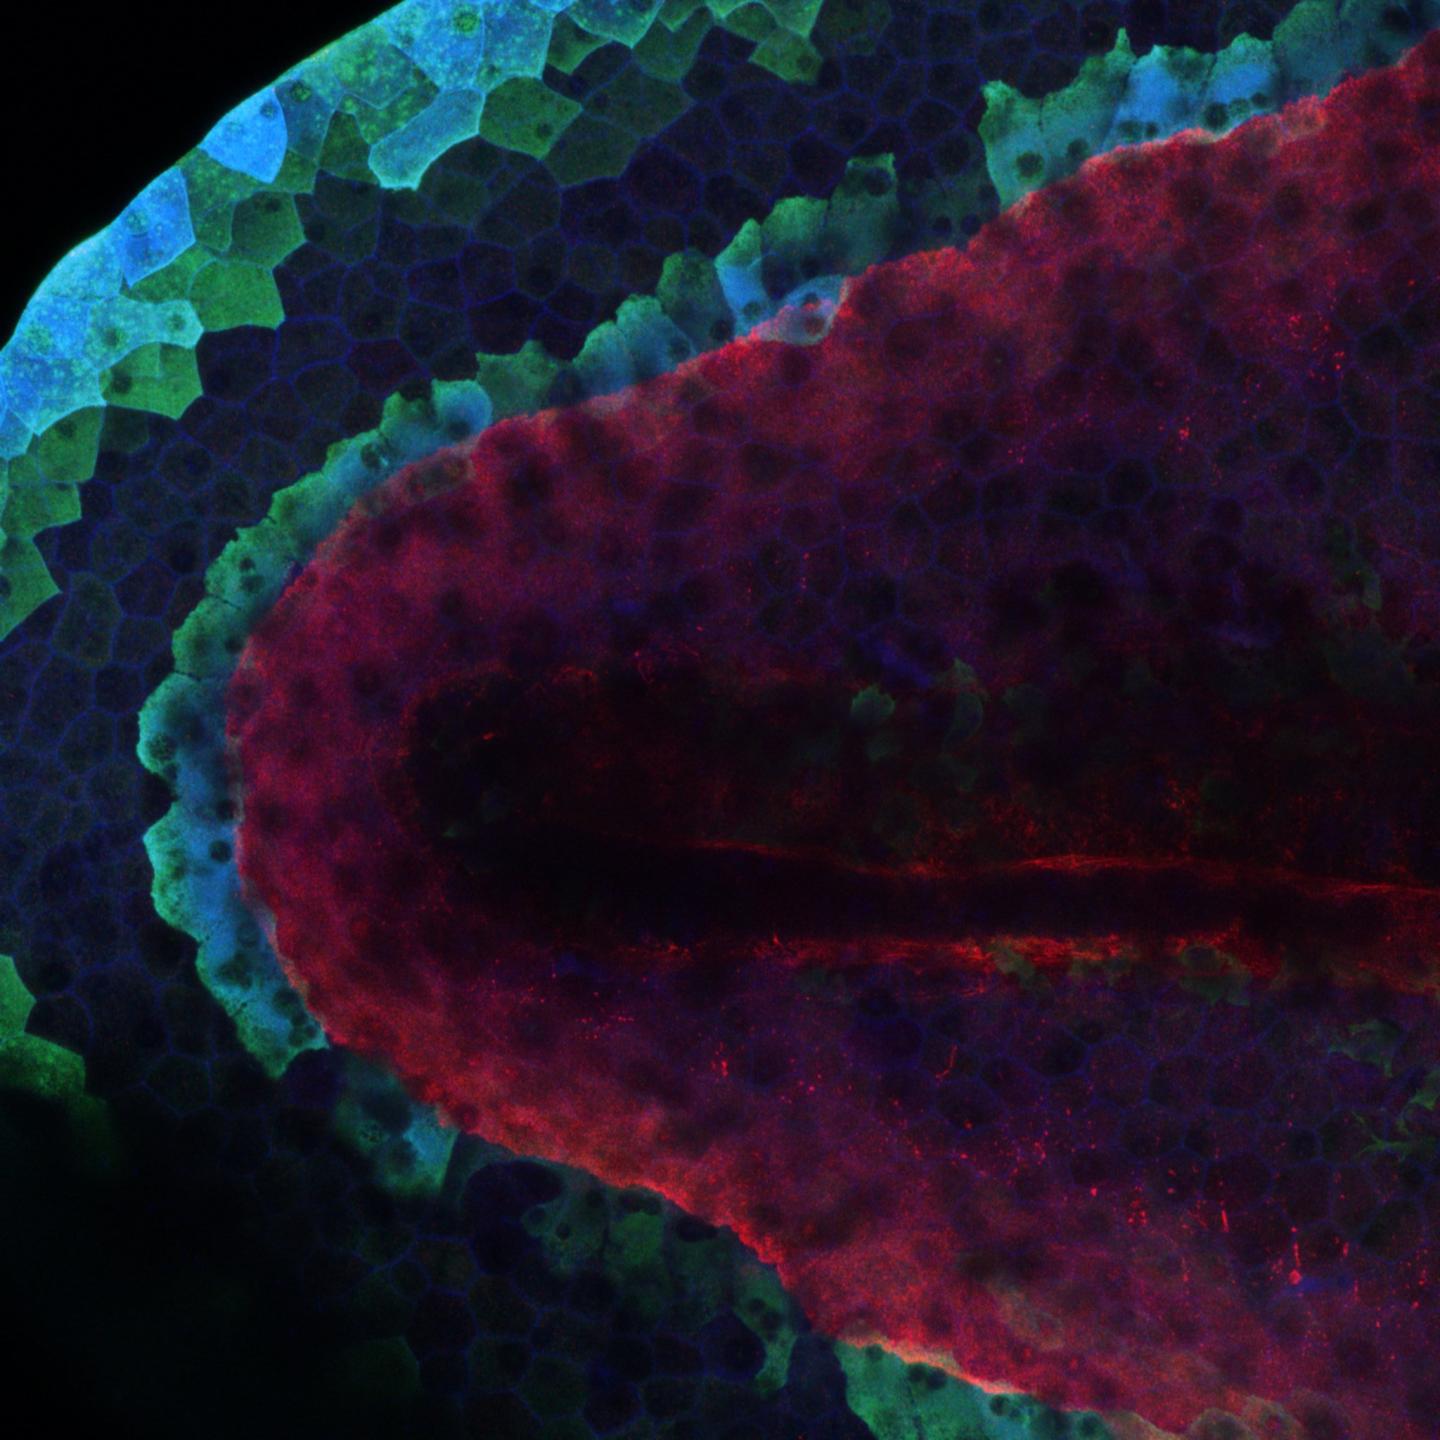 Regeneration Organizing Cells Outline the Advancing Edge of a Regenerating Tail of a Tadpole